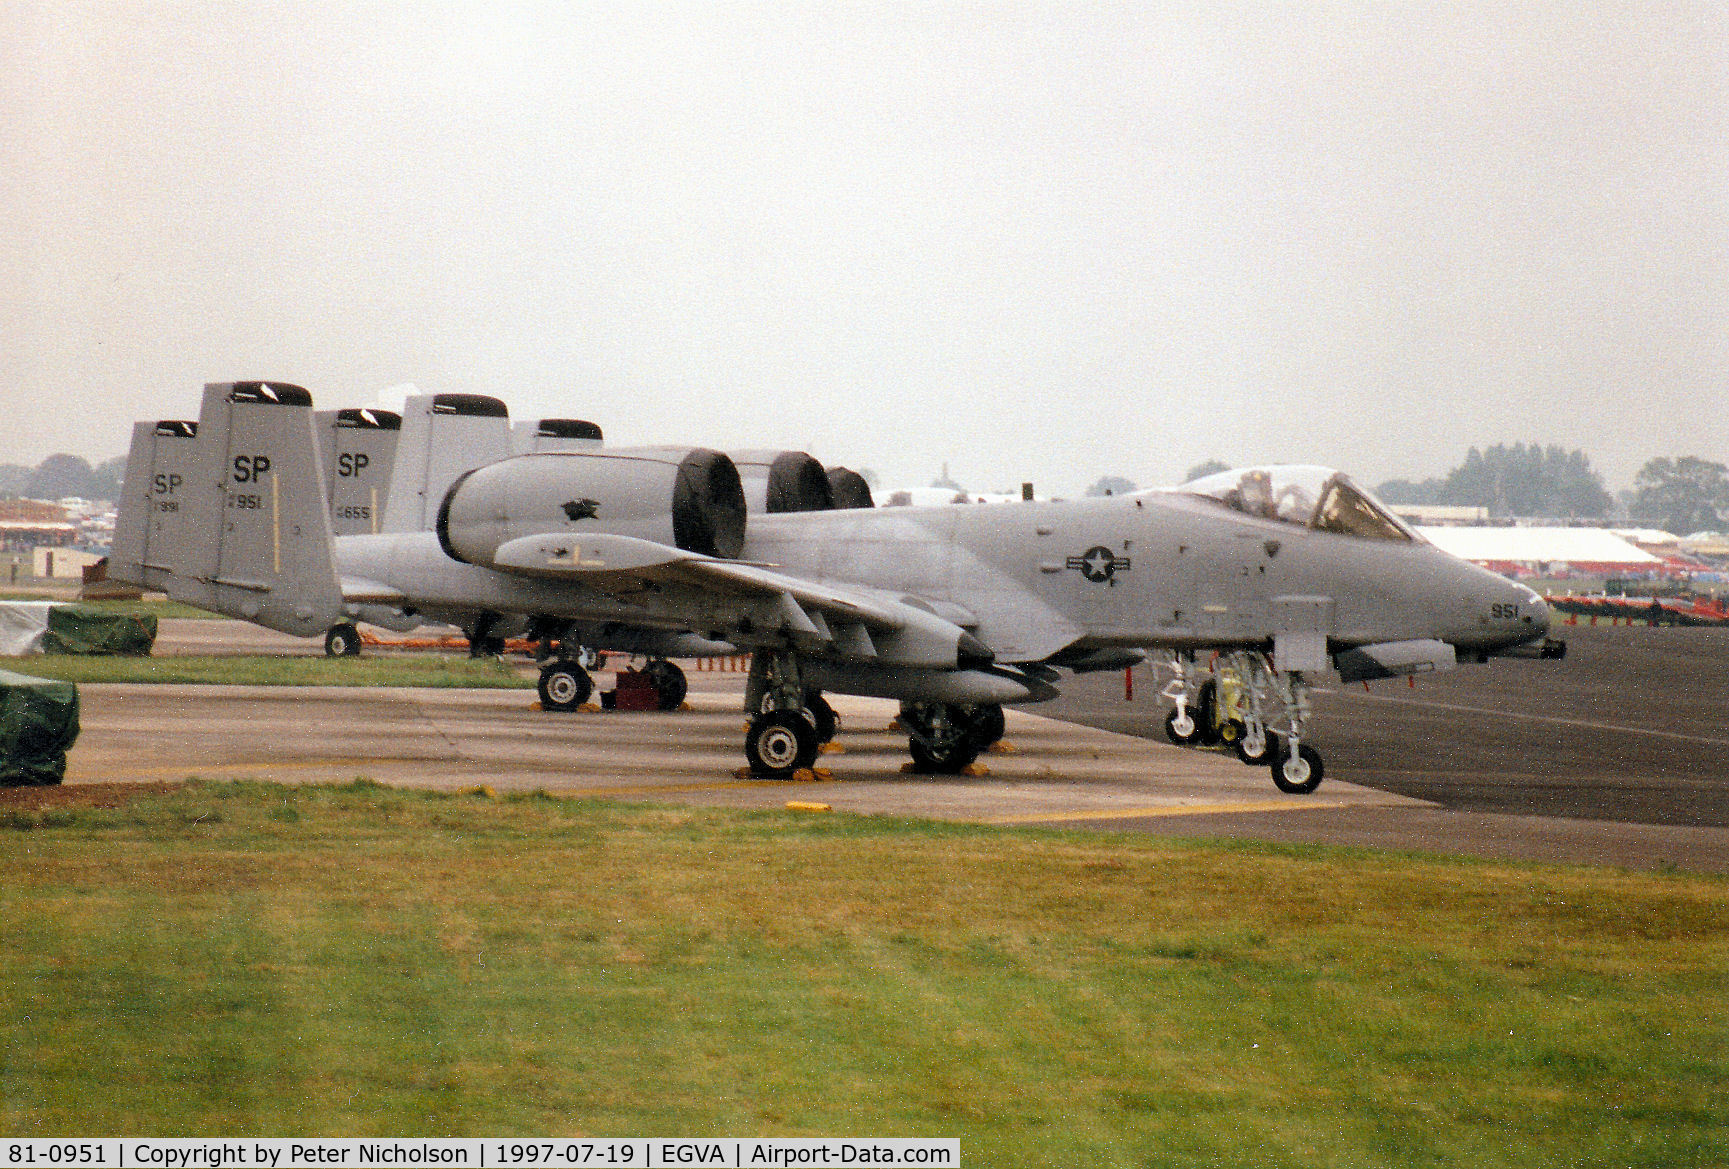 81-0951, 1981 Fairchild Republic A-10A Thunderbolt II C/N A10-0646, Another view of the Spangdahlem based A-10A Thunderbolt, callsign Panther 11, on the flight-line at the 1997 Intnl Air Tattoo at RAF Fairford.